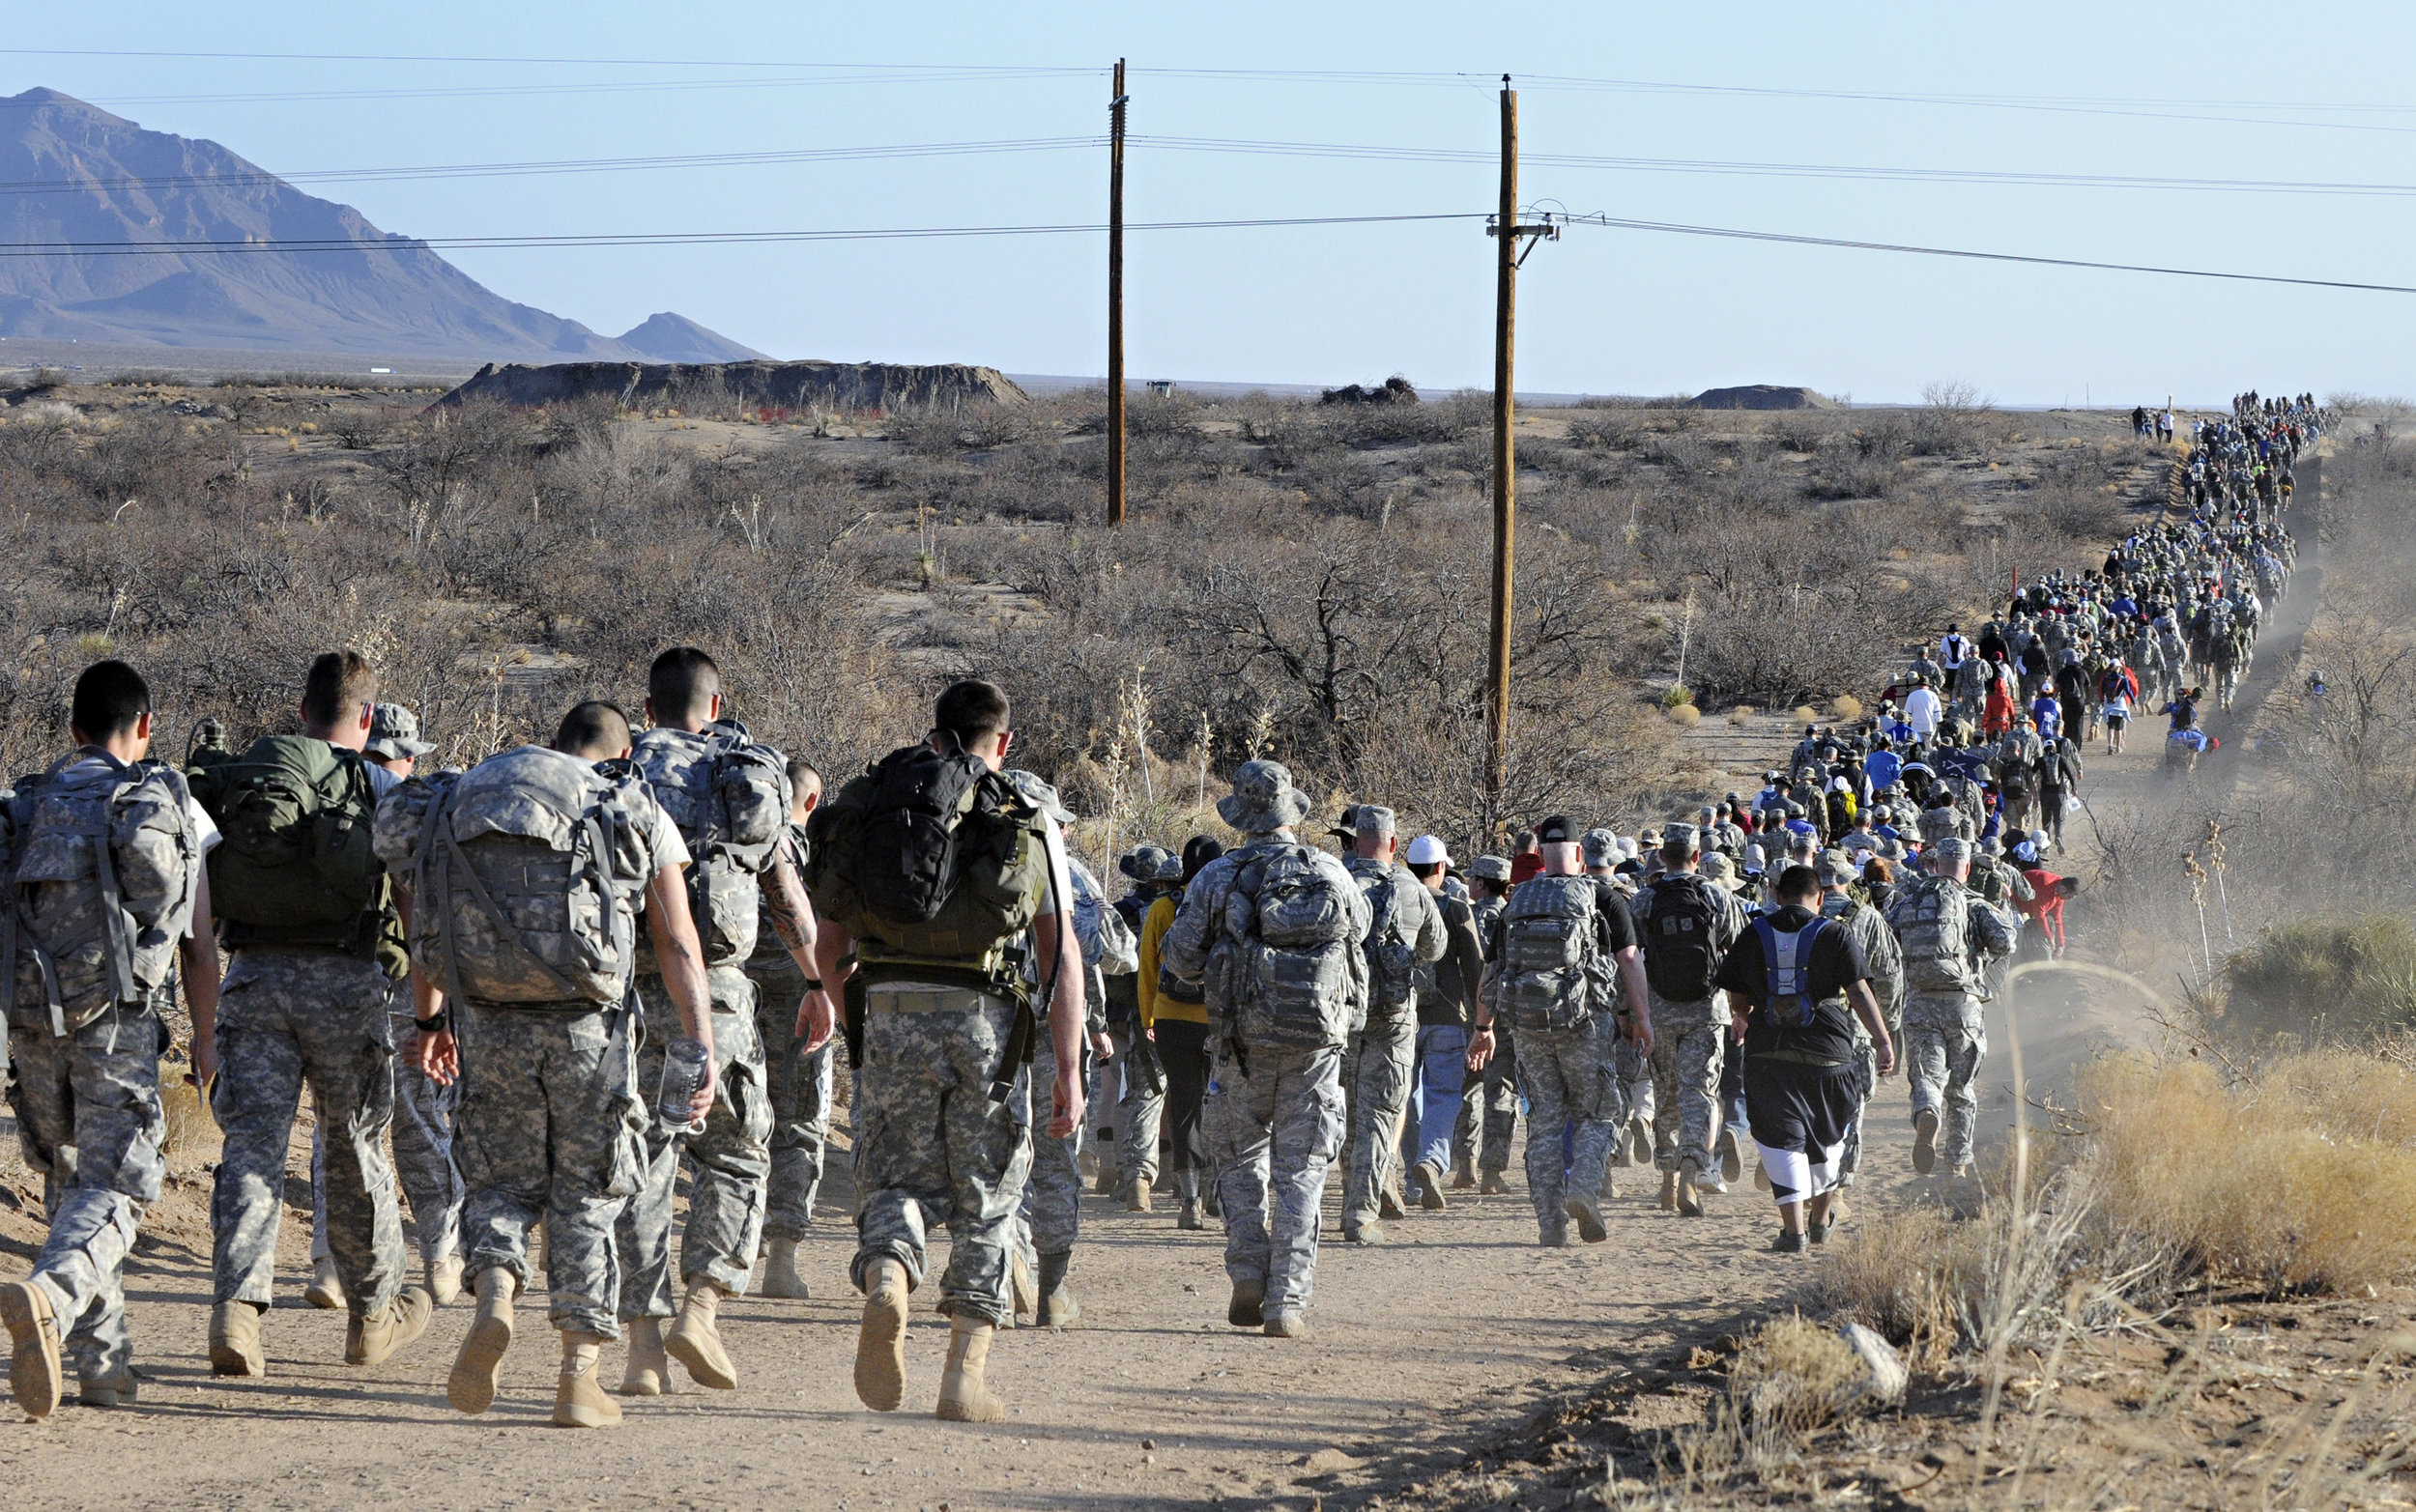  Walkers hike through the White Sands Missile Range during the 22nd Annual Bataan Memorial Death March, Sunday, March 27, 2011. (Morgan Petroski/Albuquerque Journal) 